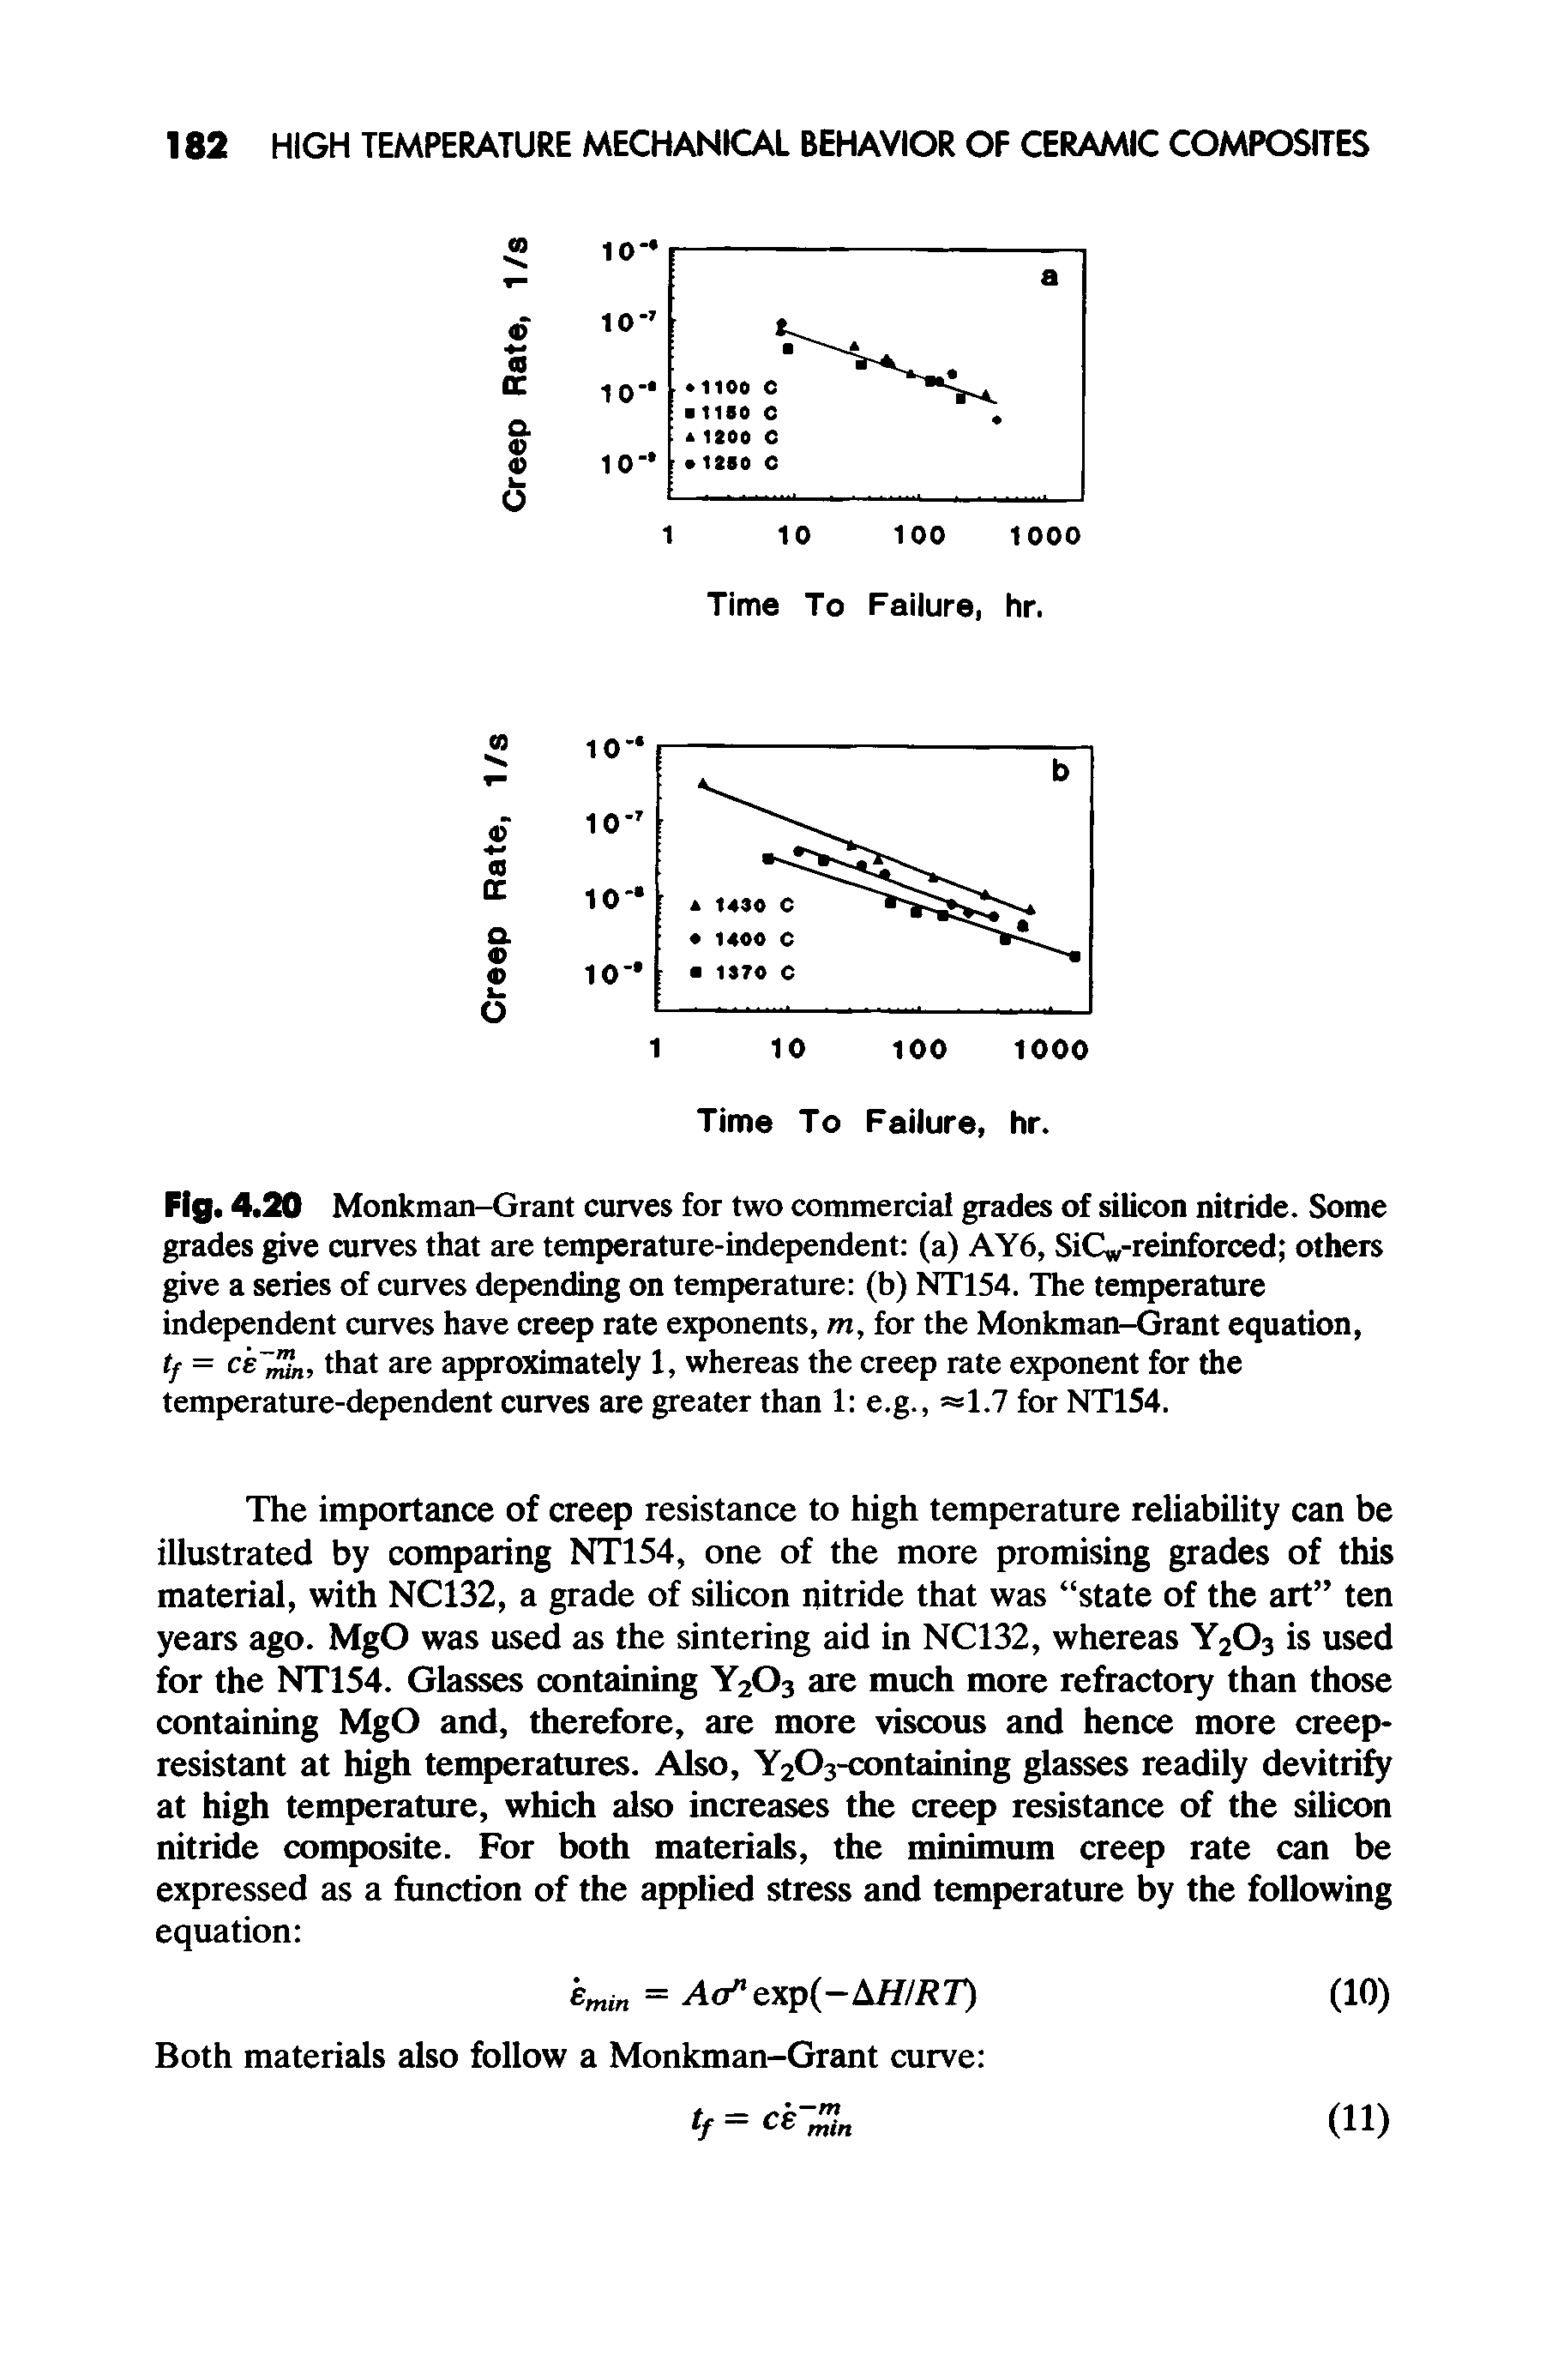 Fig. 4.20 Monkman-Grant curves for two commercial grades of silicon nitride. Some grades give curves that are temperature-independent (a) AY6, SiC -reinforced others give a series of curves depending on temperature (b) NT154. The temperature independent curves have creep rate exponents, m, for the Monkman-Grant equation, tf = ce L, that are approximately 1, whereas the creep rate exponent for the temperature-dependent curves are greater than 1 e.g., 1.7 for NT154.